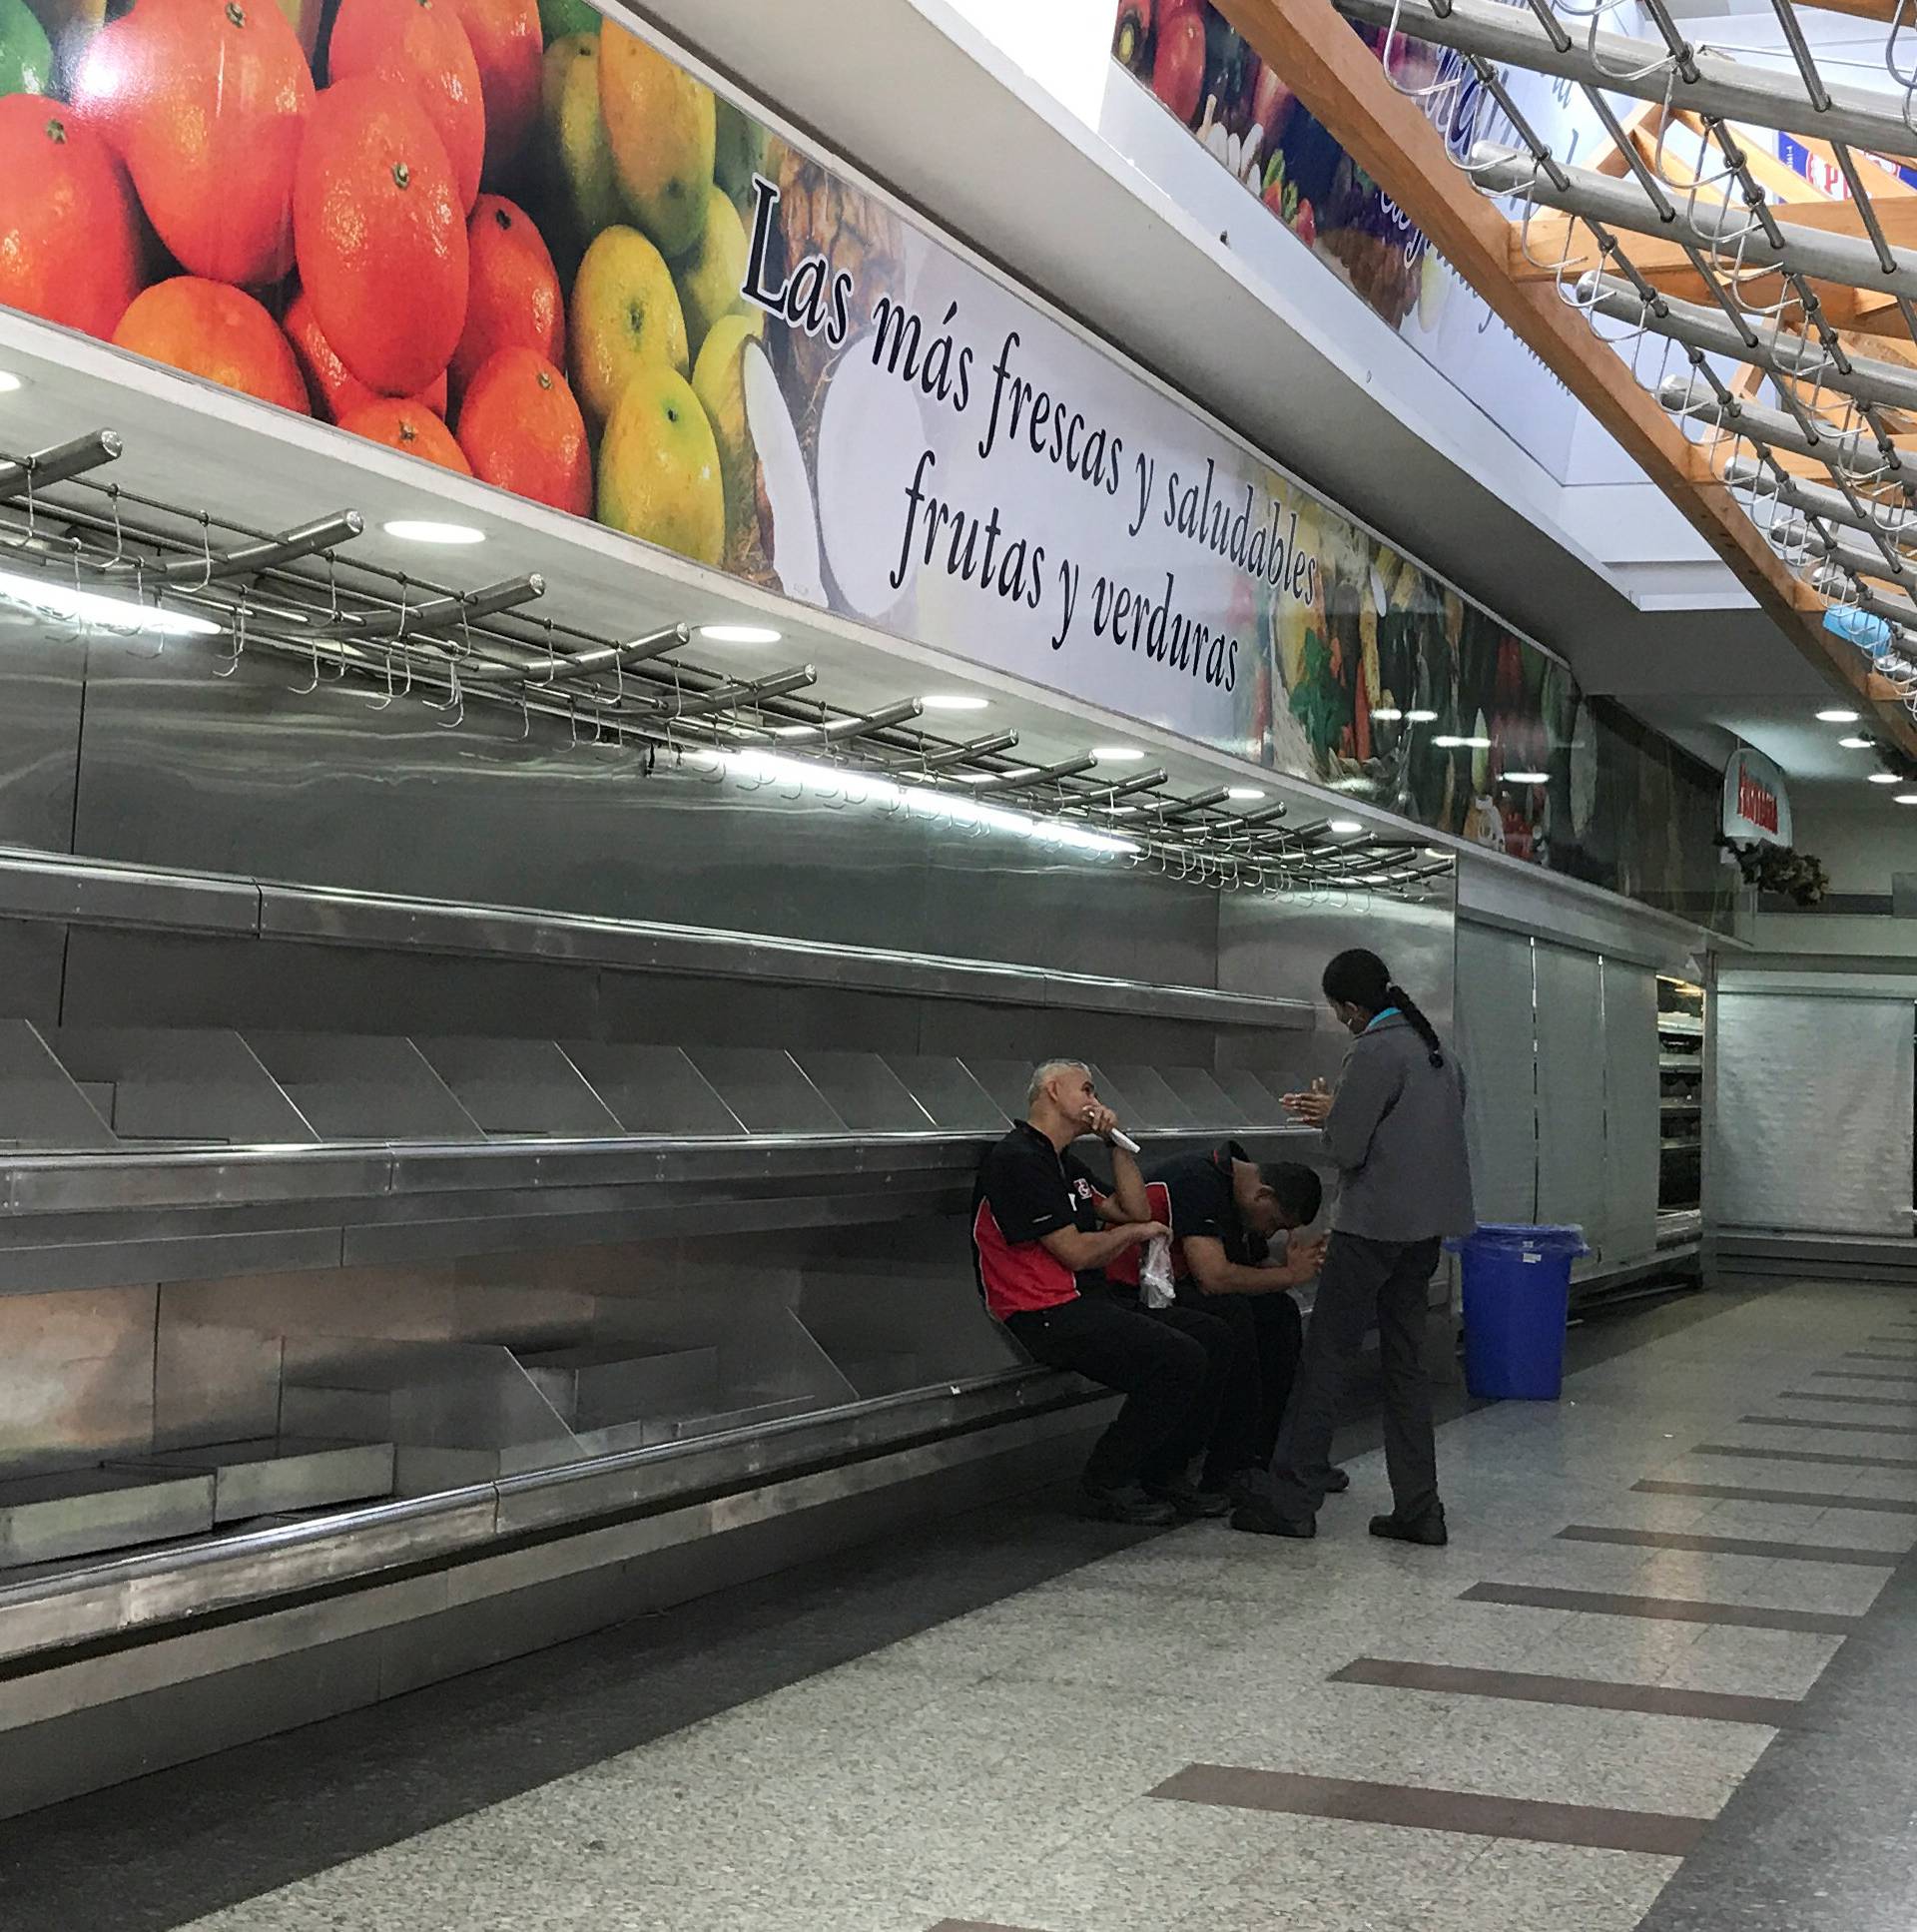 Workers sit on empty shelves at the fruit and vegetables area in a supermarket in Caracas